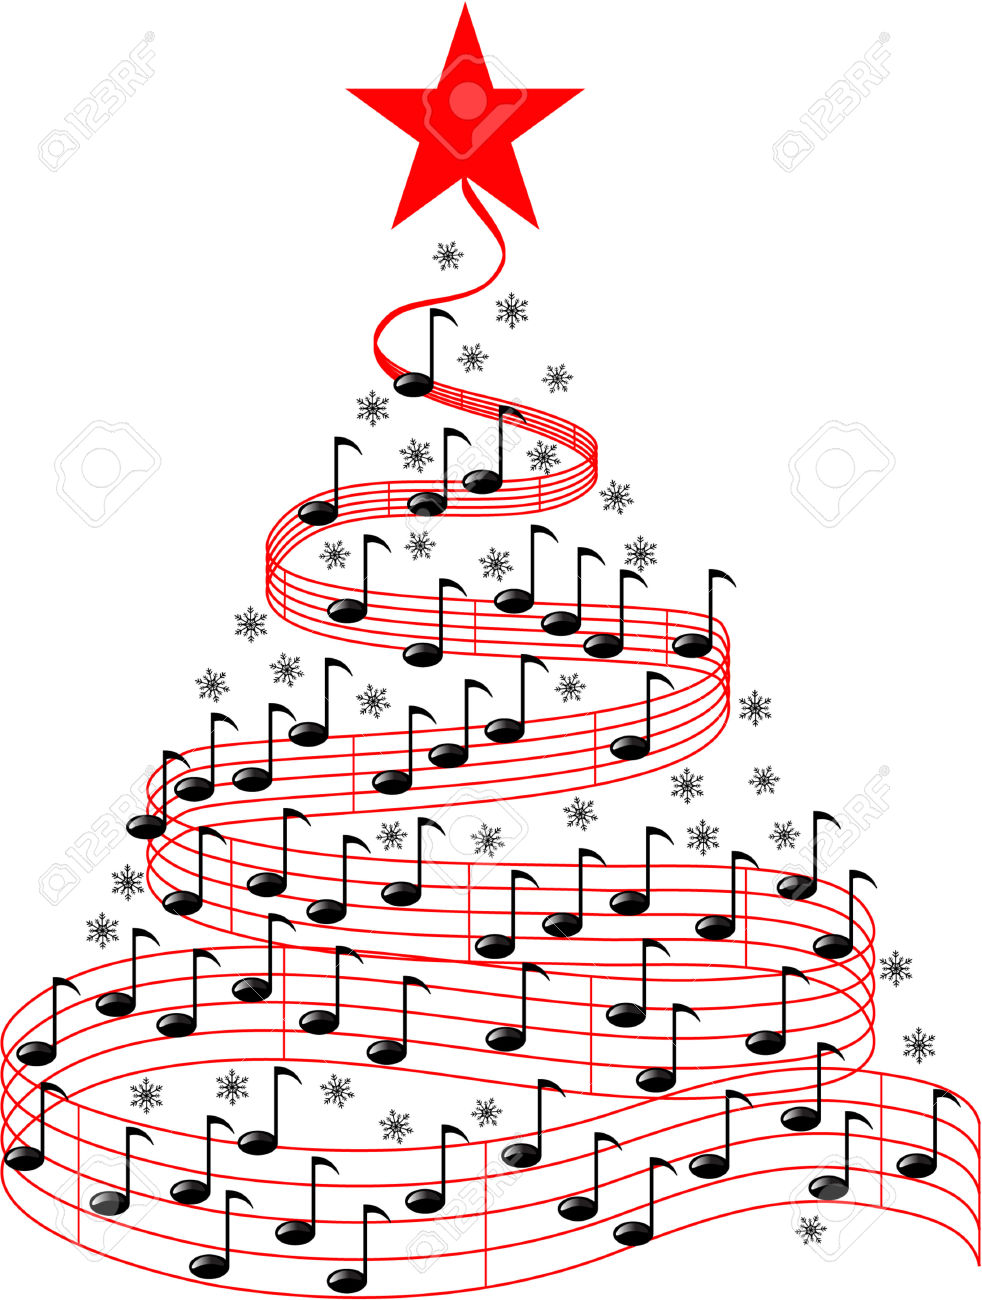 Christmas music notes clipart .